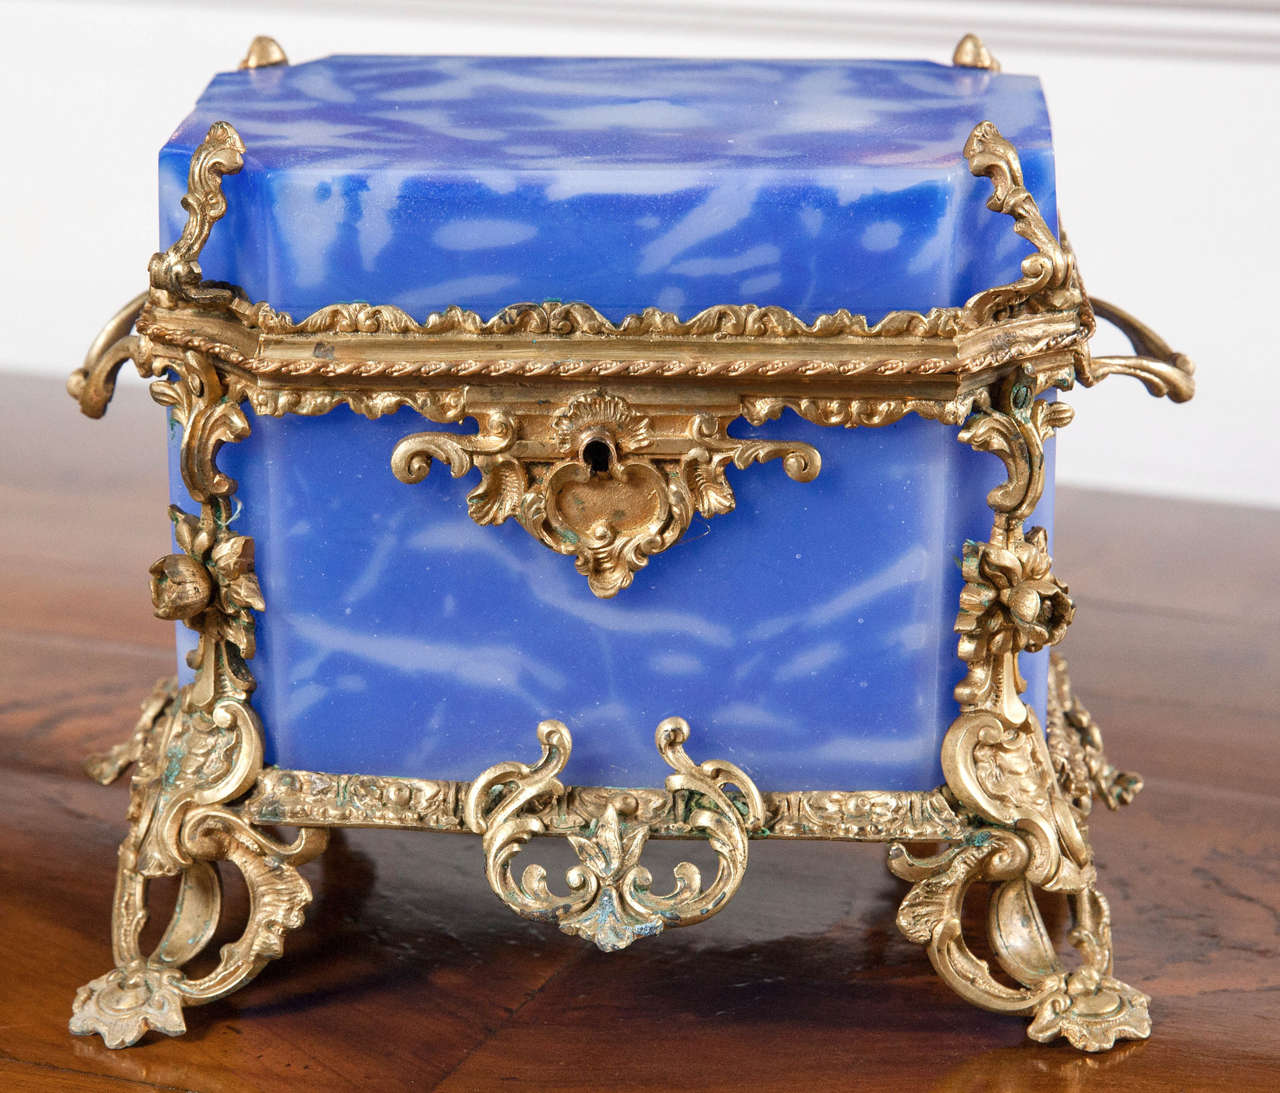 An antique French opaline rectangular hinged cover glass box with an etched blue swirl design and Fine bronze mounts.